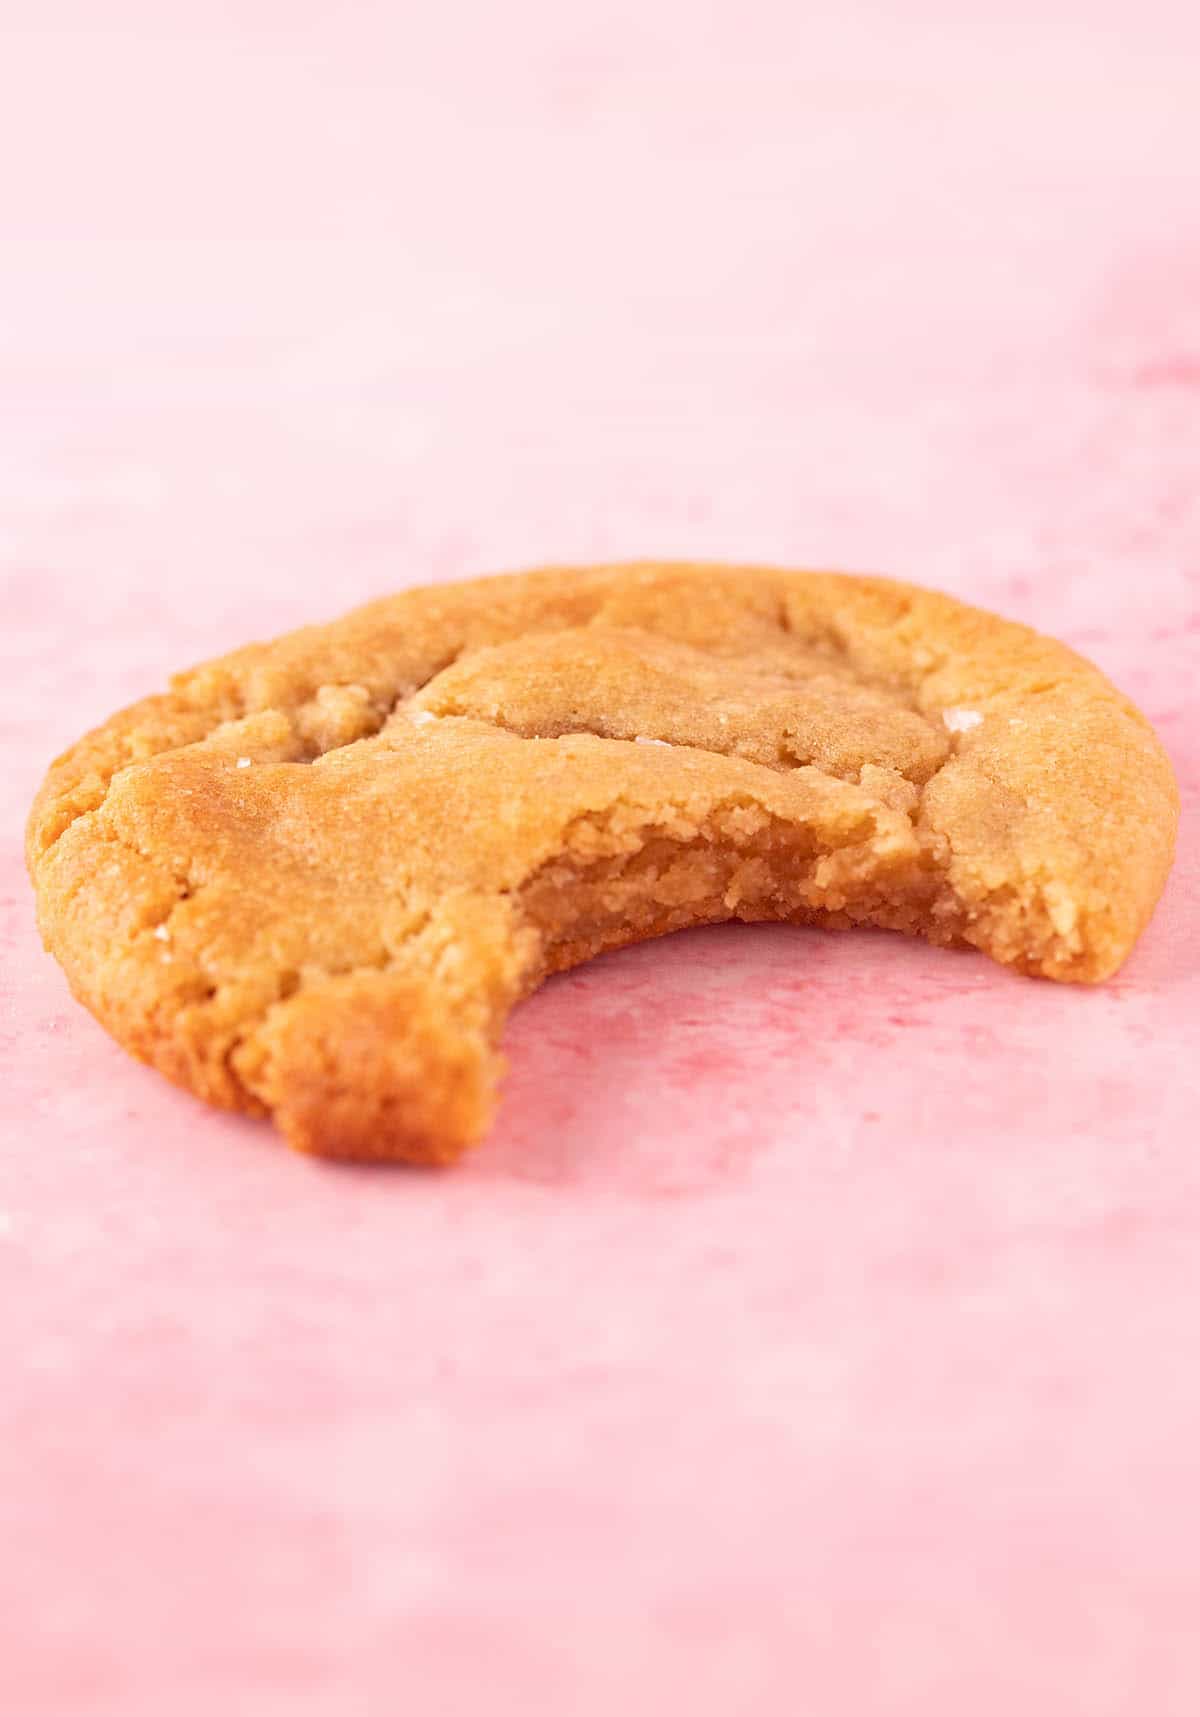 A homemade peanut butter miso cookies with a bite taken out of it.